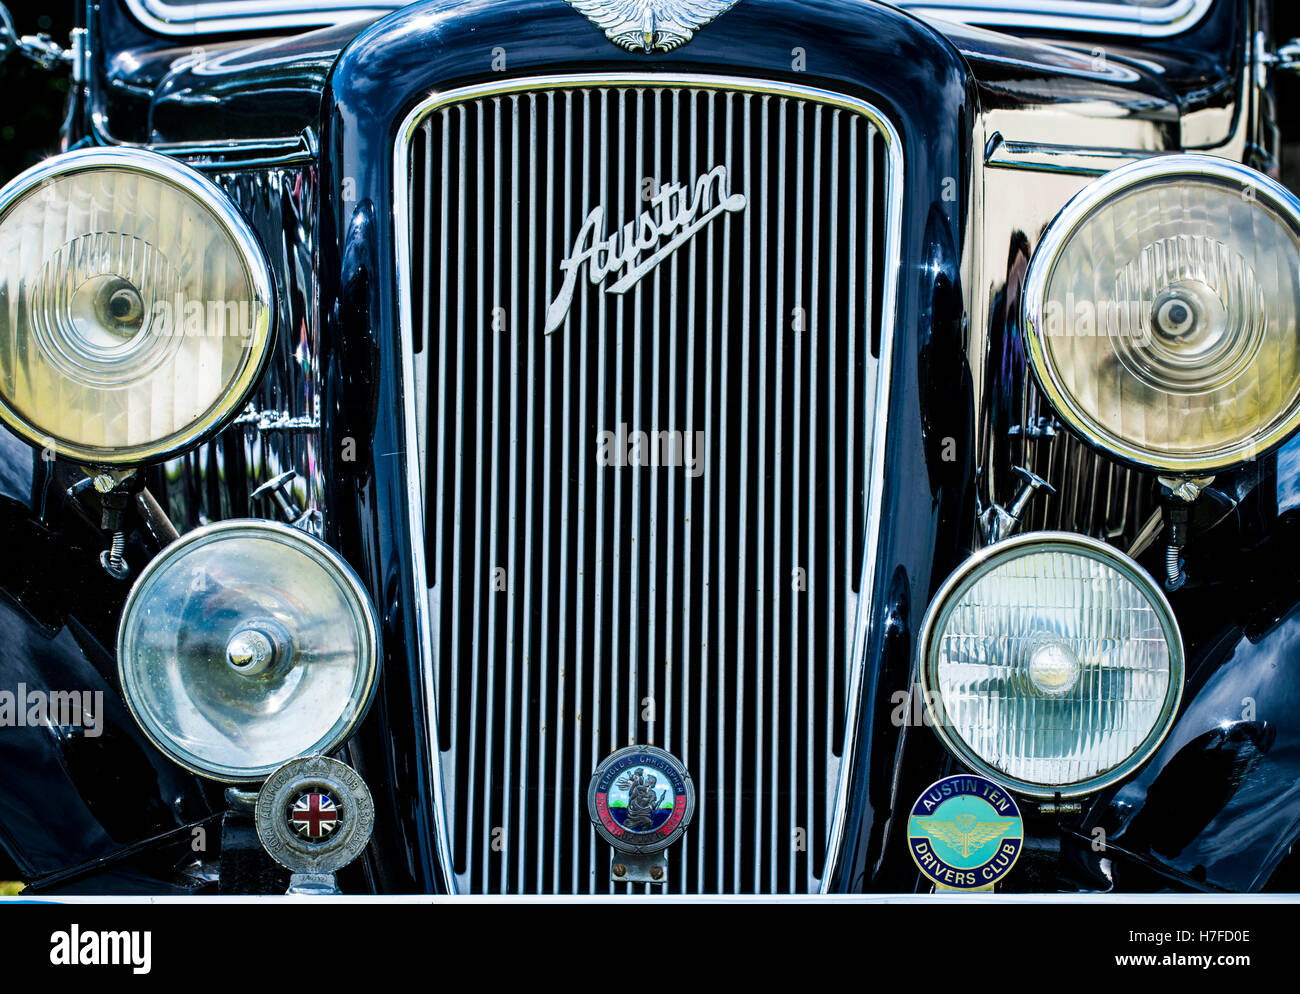 A head on view of a classic Austin motorcar Stock Photo